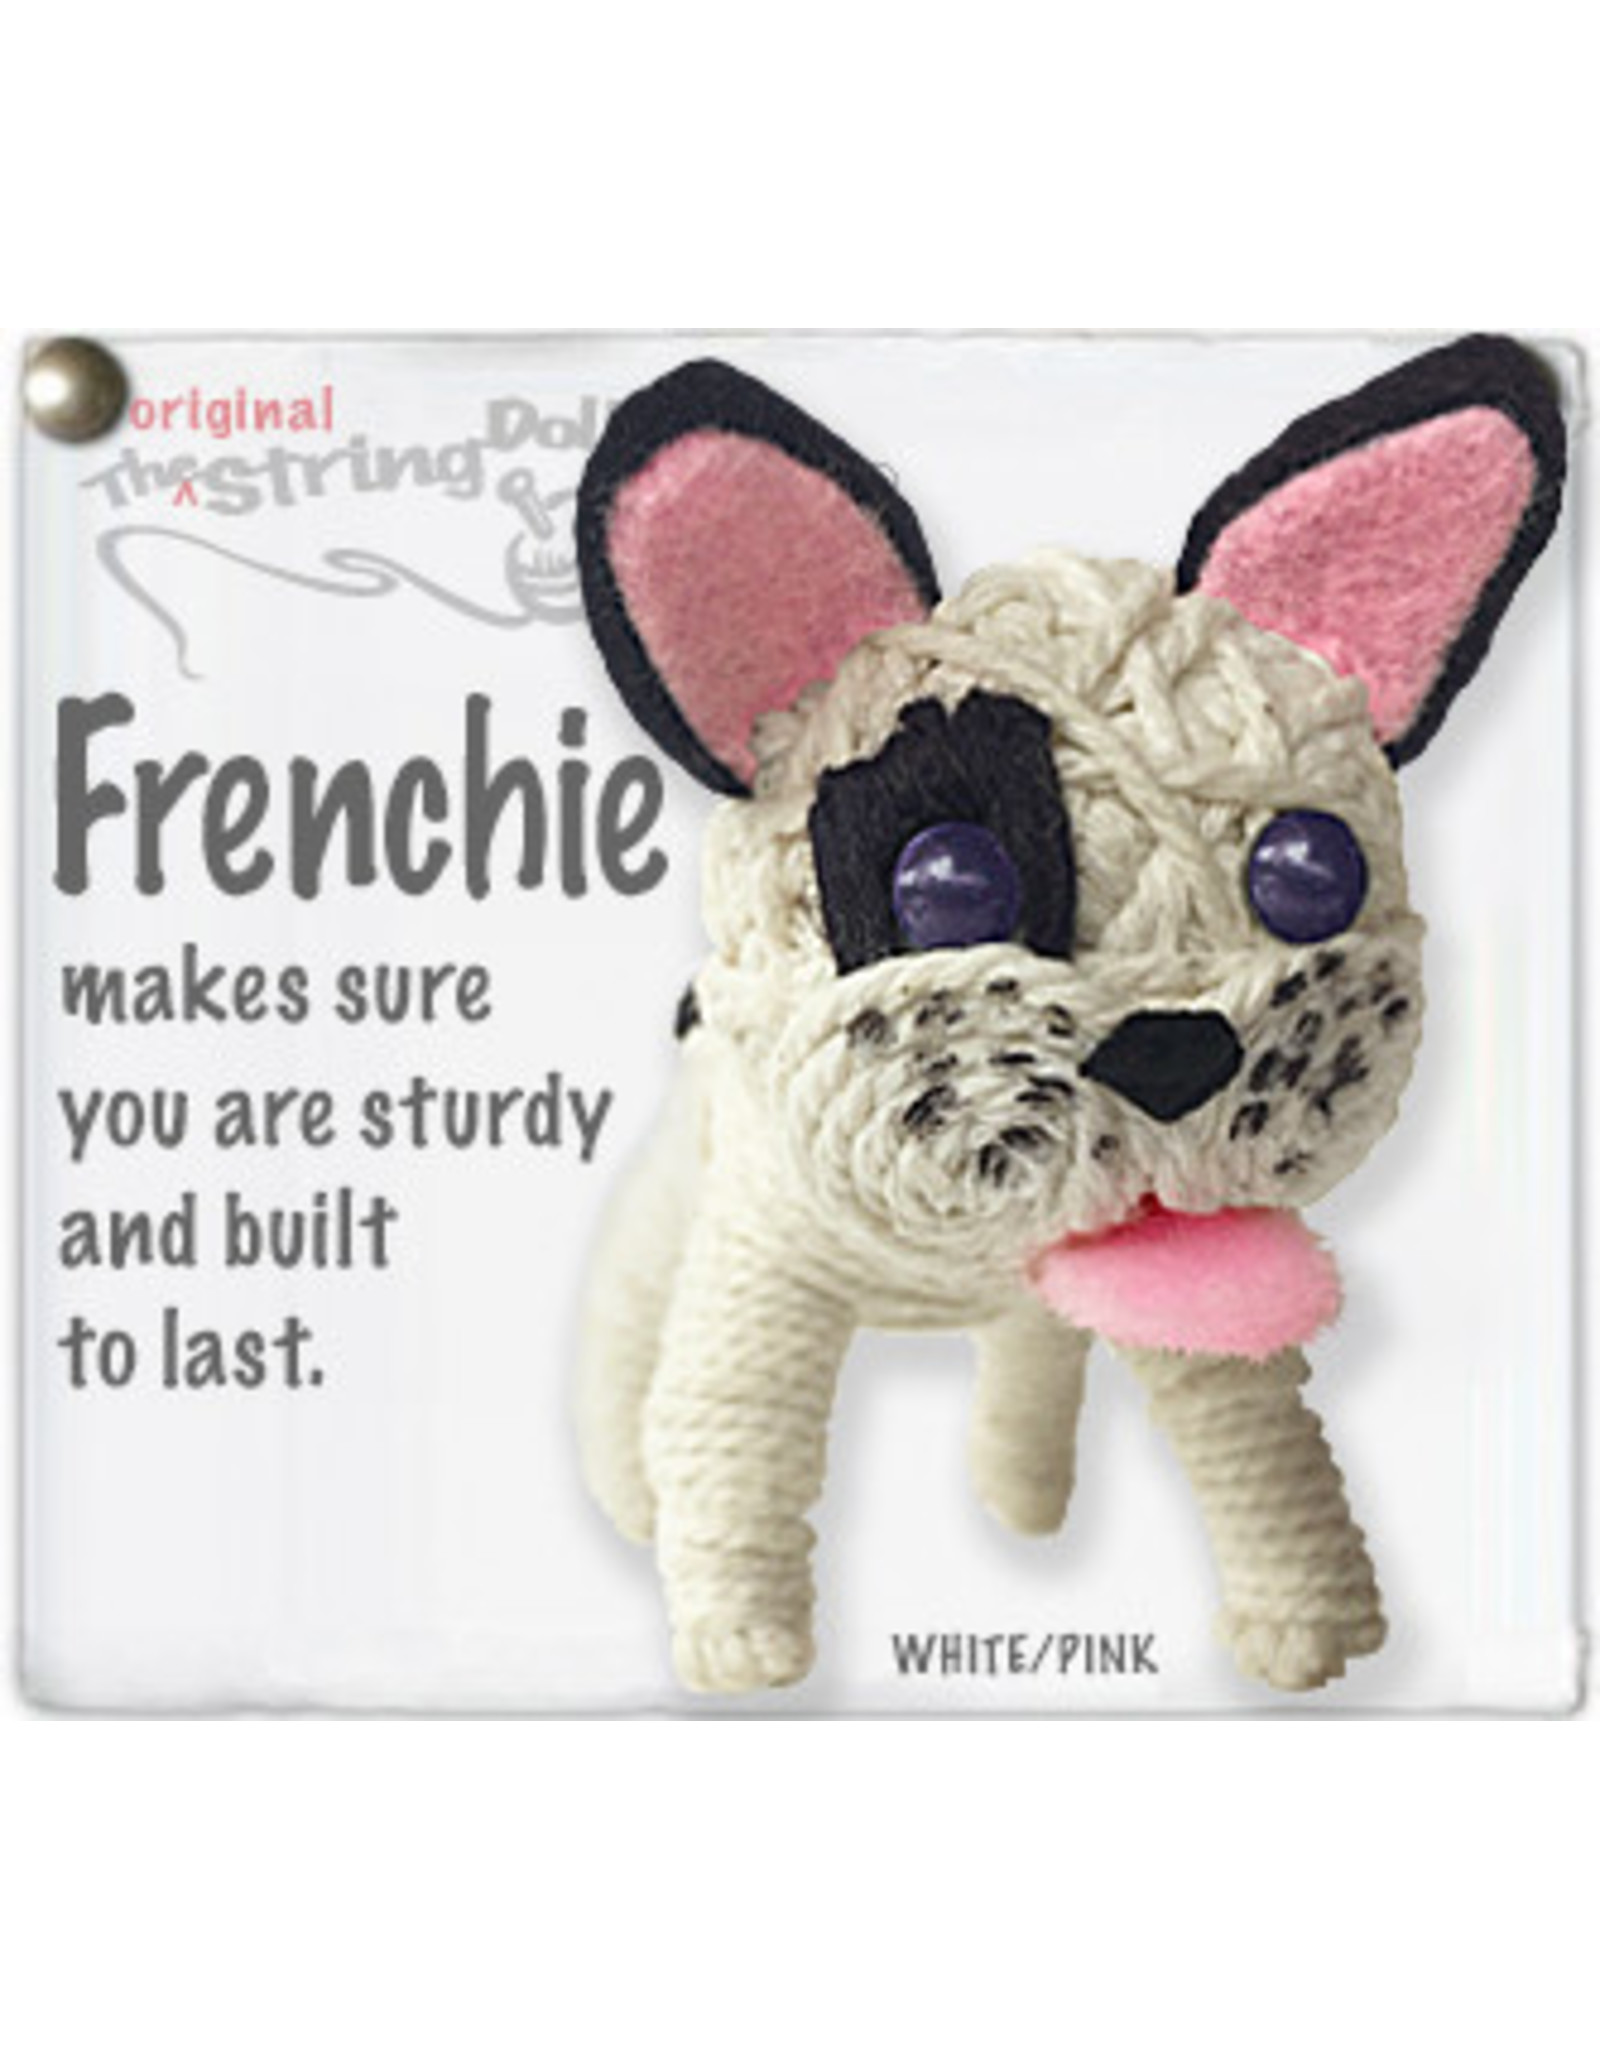 Trade roots Stringdoll Frenchie